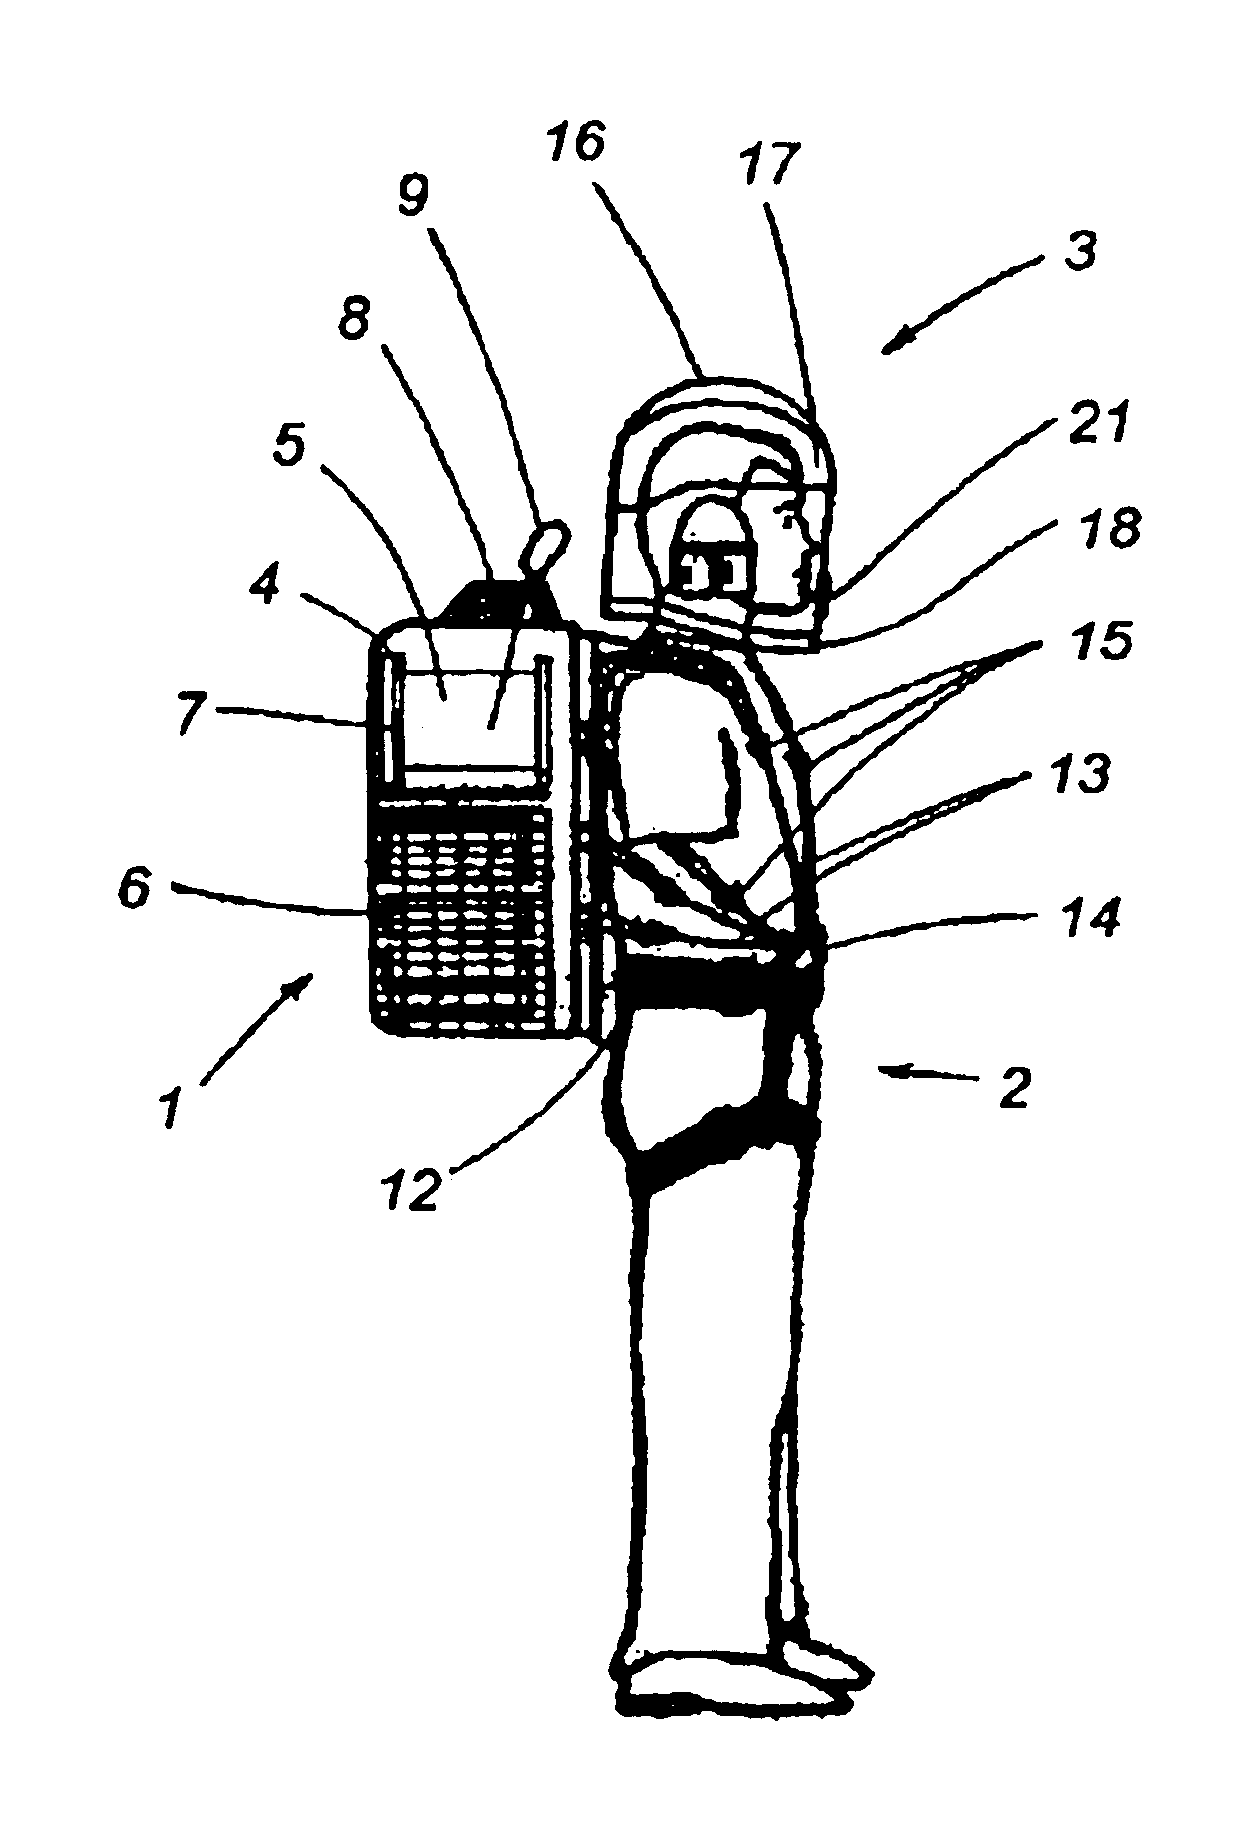 Apparatus for exterior evacuation from buildings